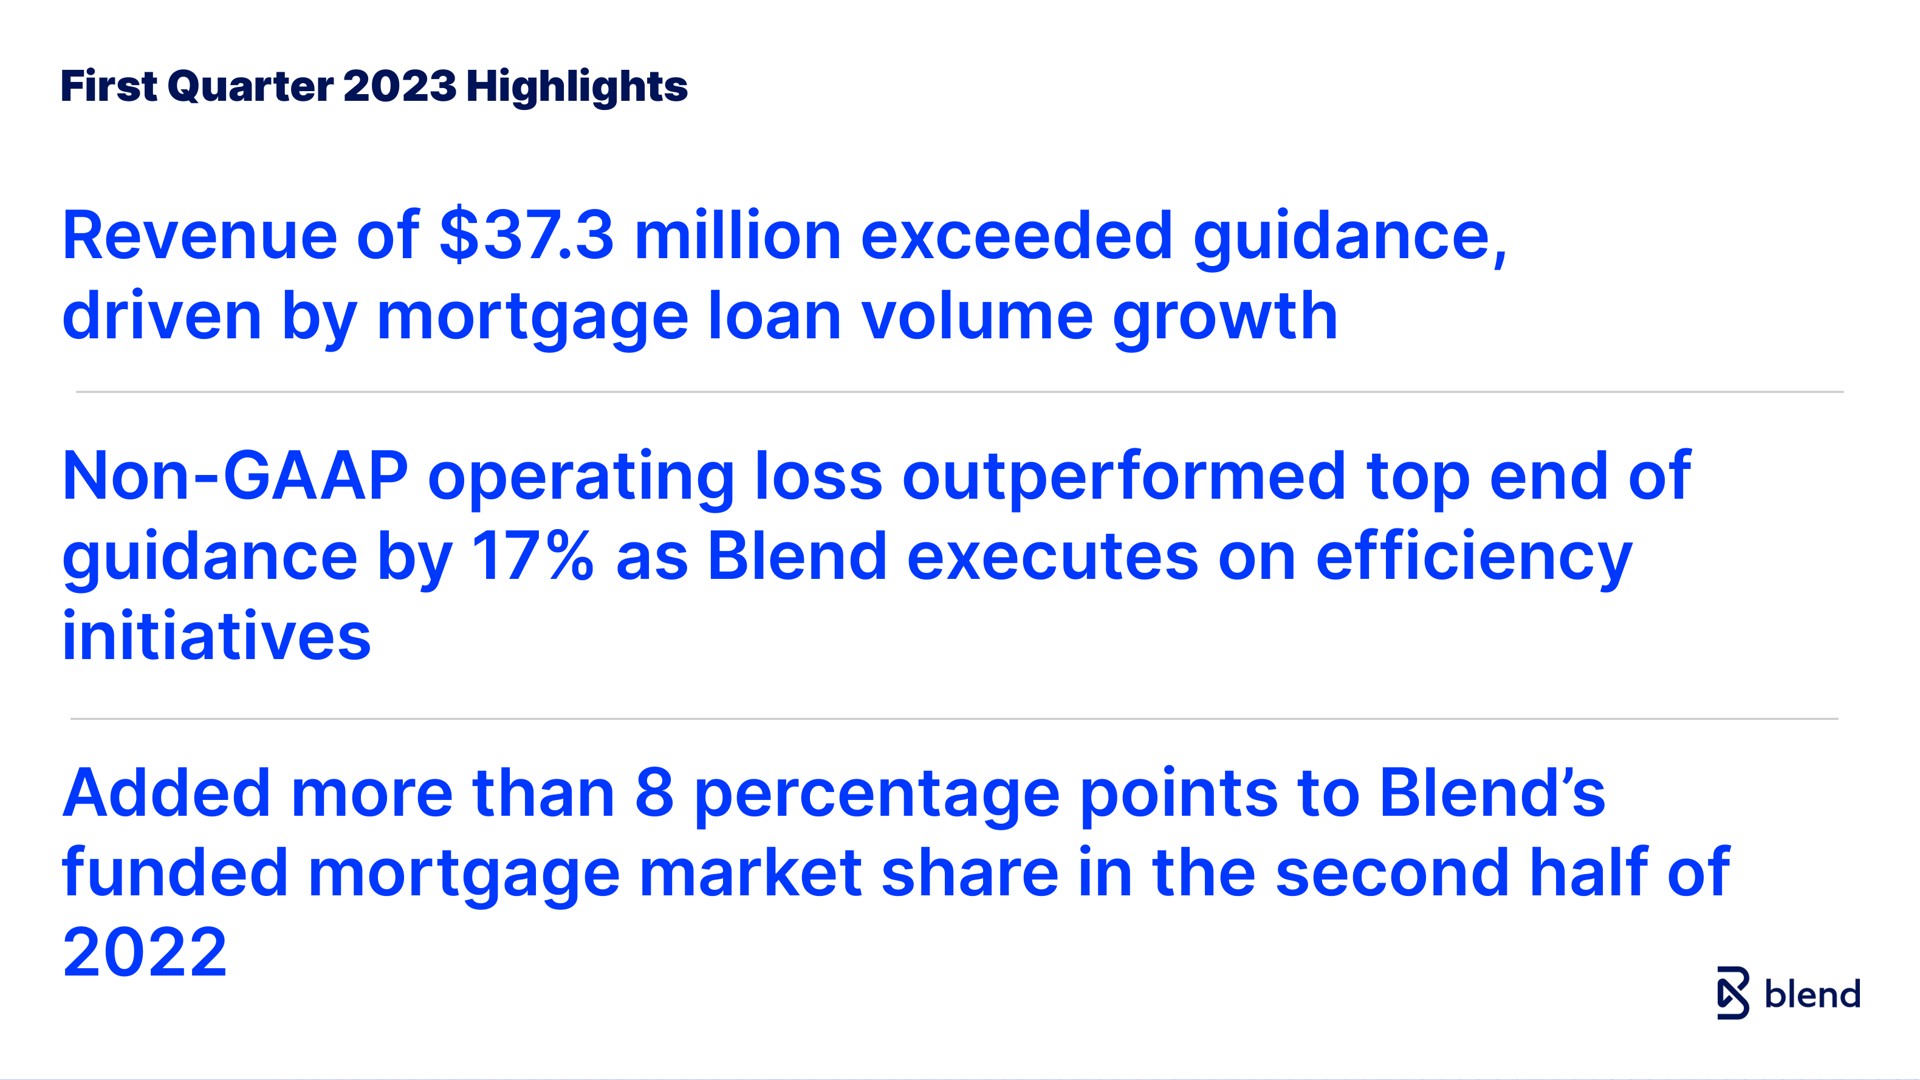 first quarter highlights revenue of million exceeded guidance driven by mortgage loan volume growth non operating loss outperformed top end of guidance by as blend executes on efficiency initiatives added more than percentage points to blend funded mortgage market share in the second half of | Blend